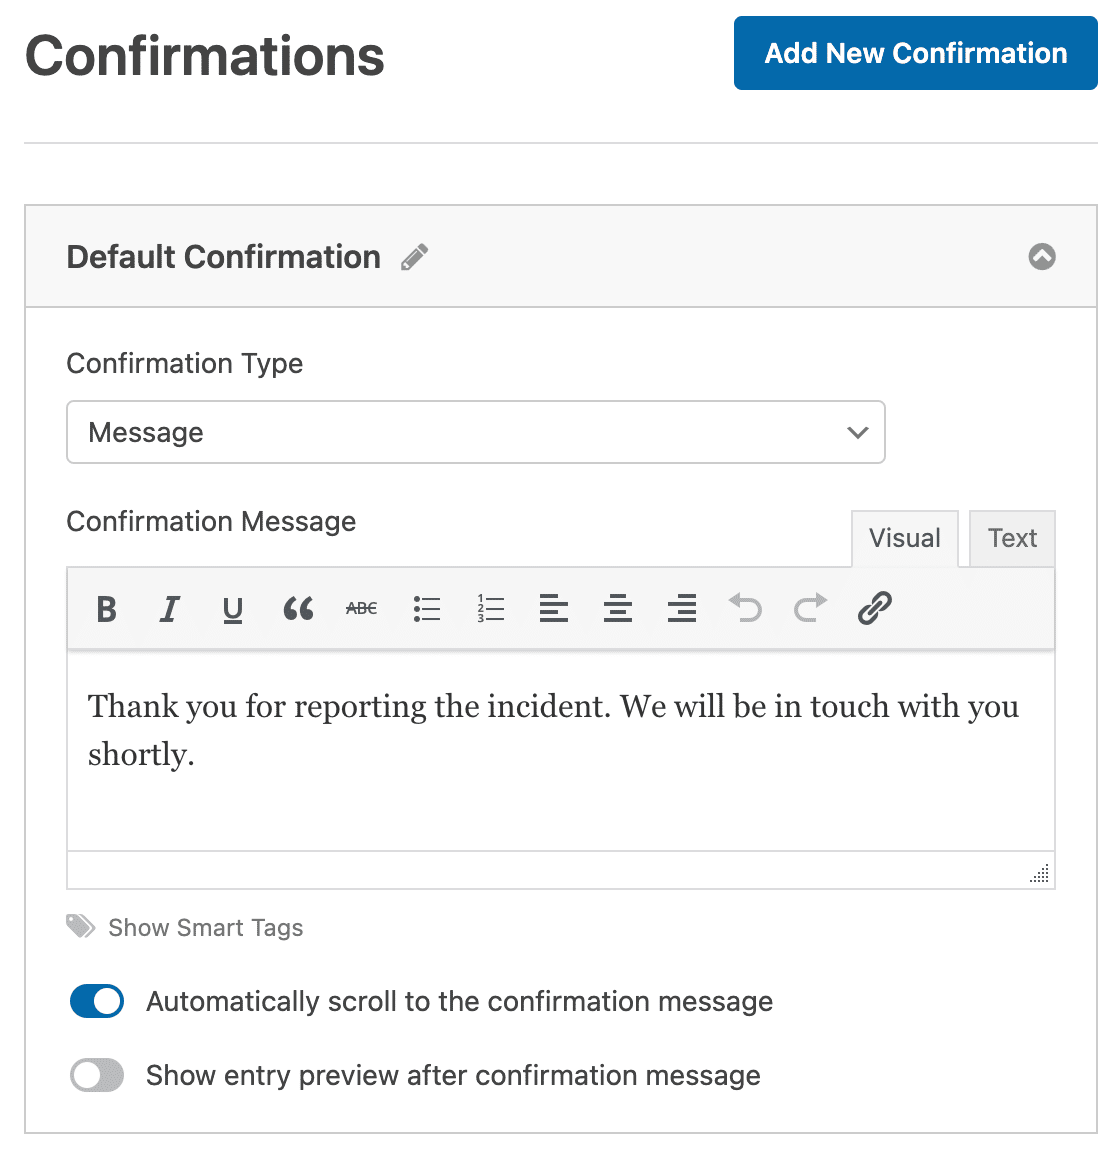 Customizing the incident report form confirmation message